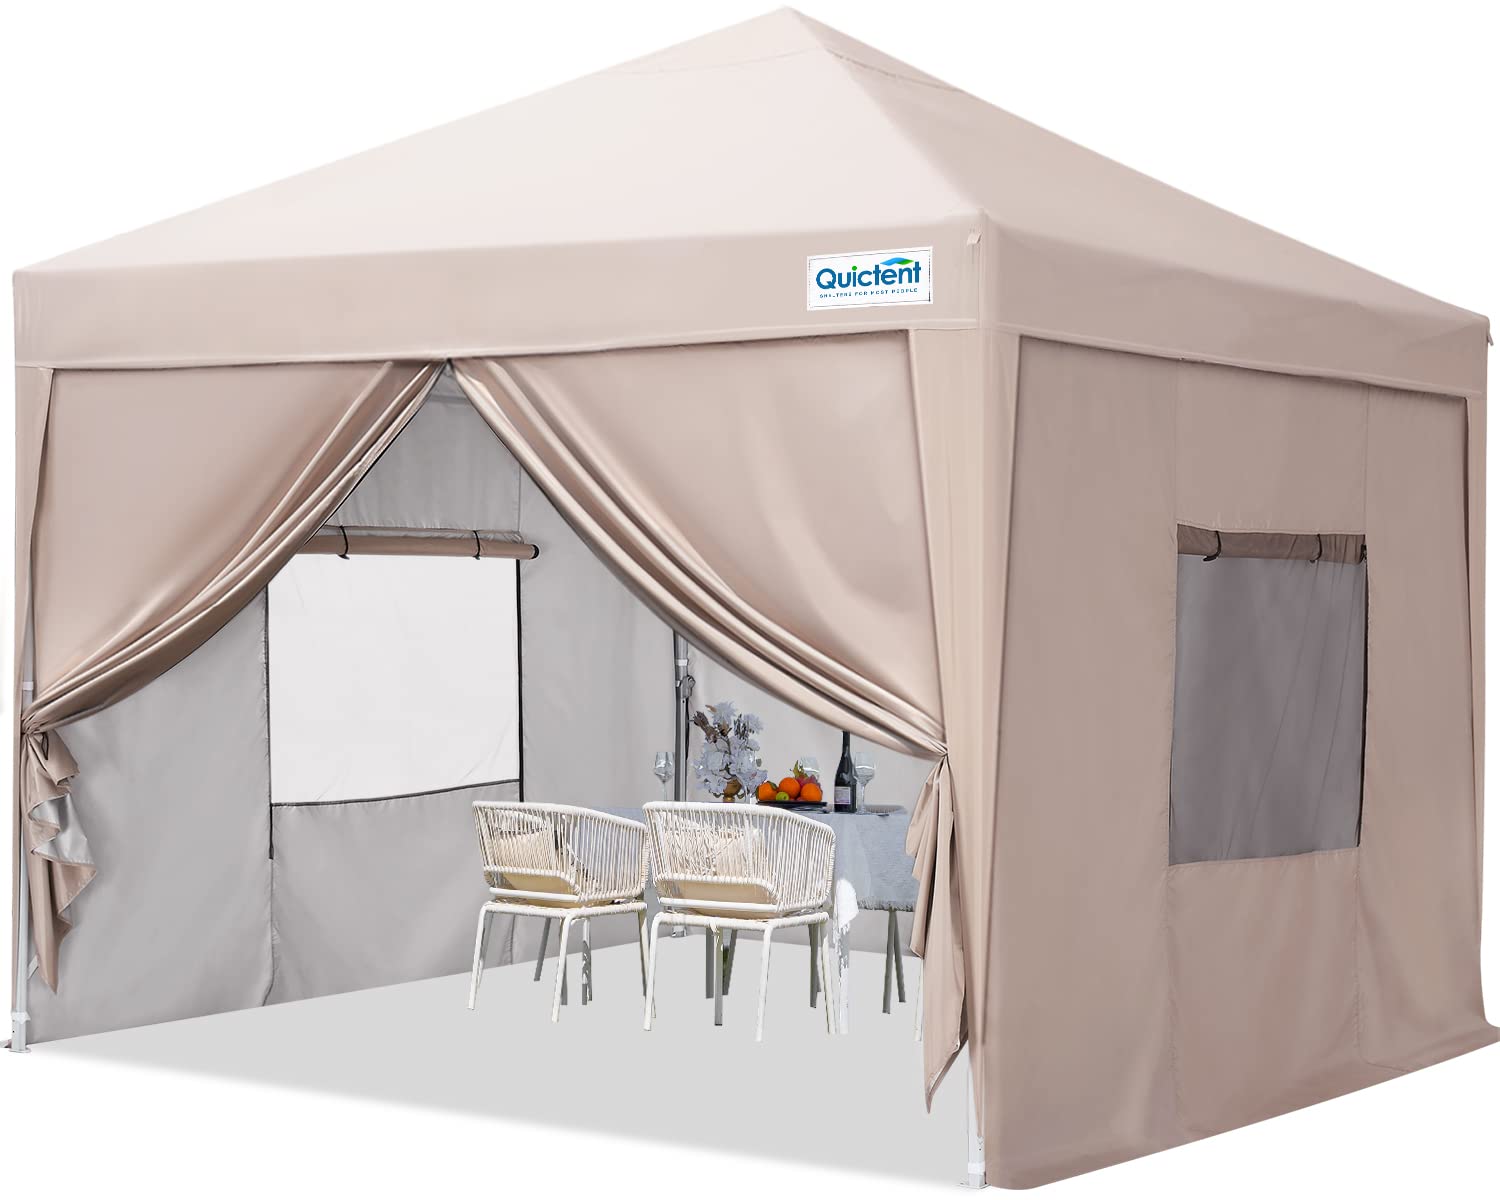 Quictent 8x8/10x10/10x20 Portable Pop Up Canopy with Sidewalls